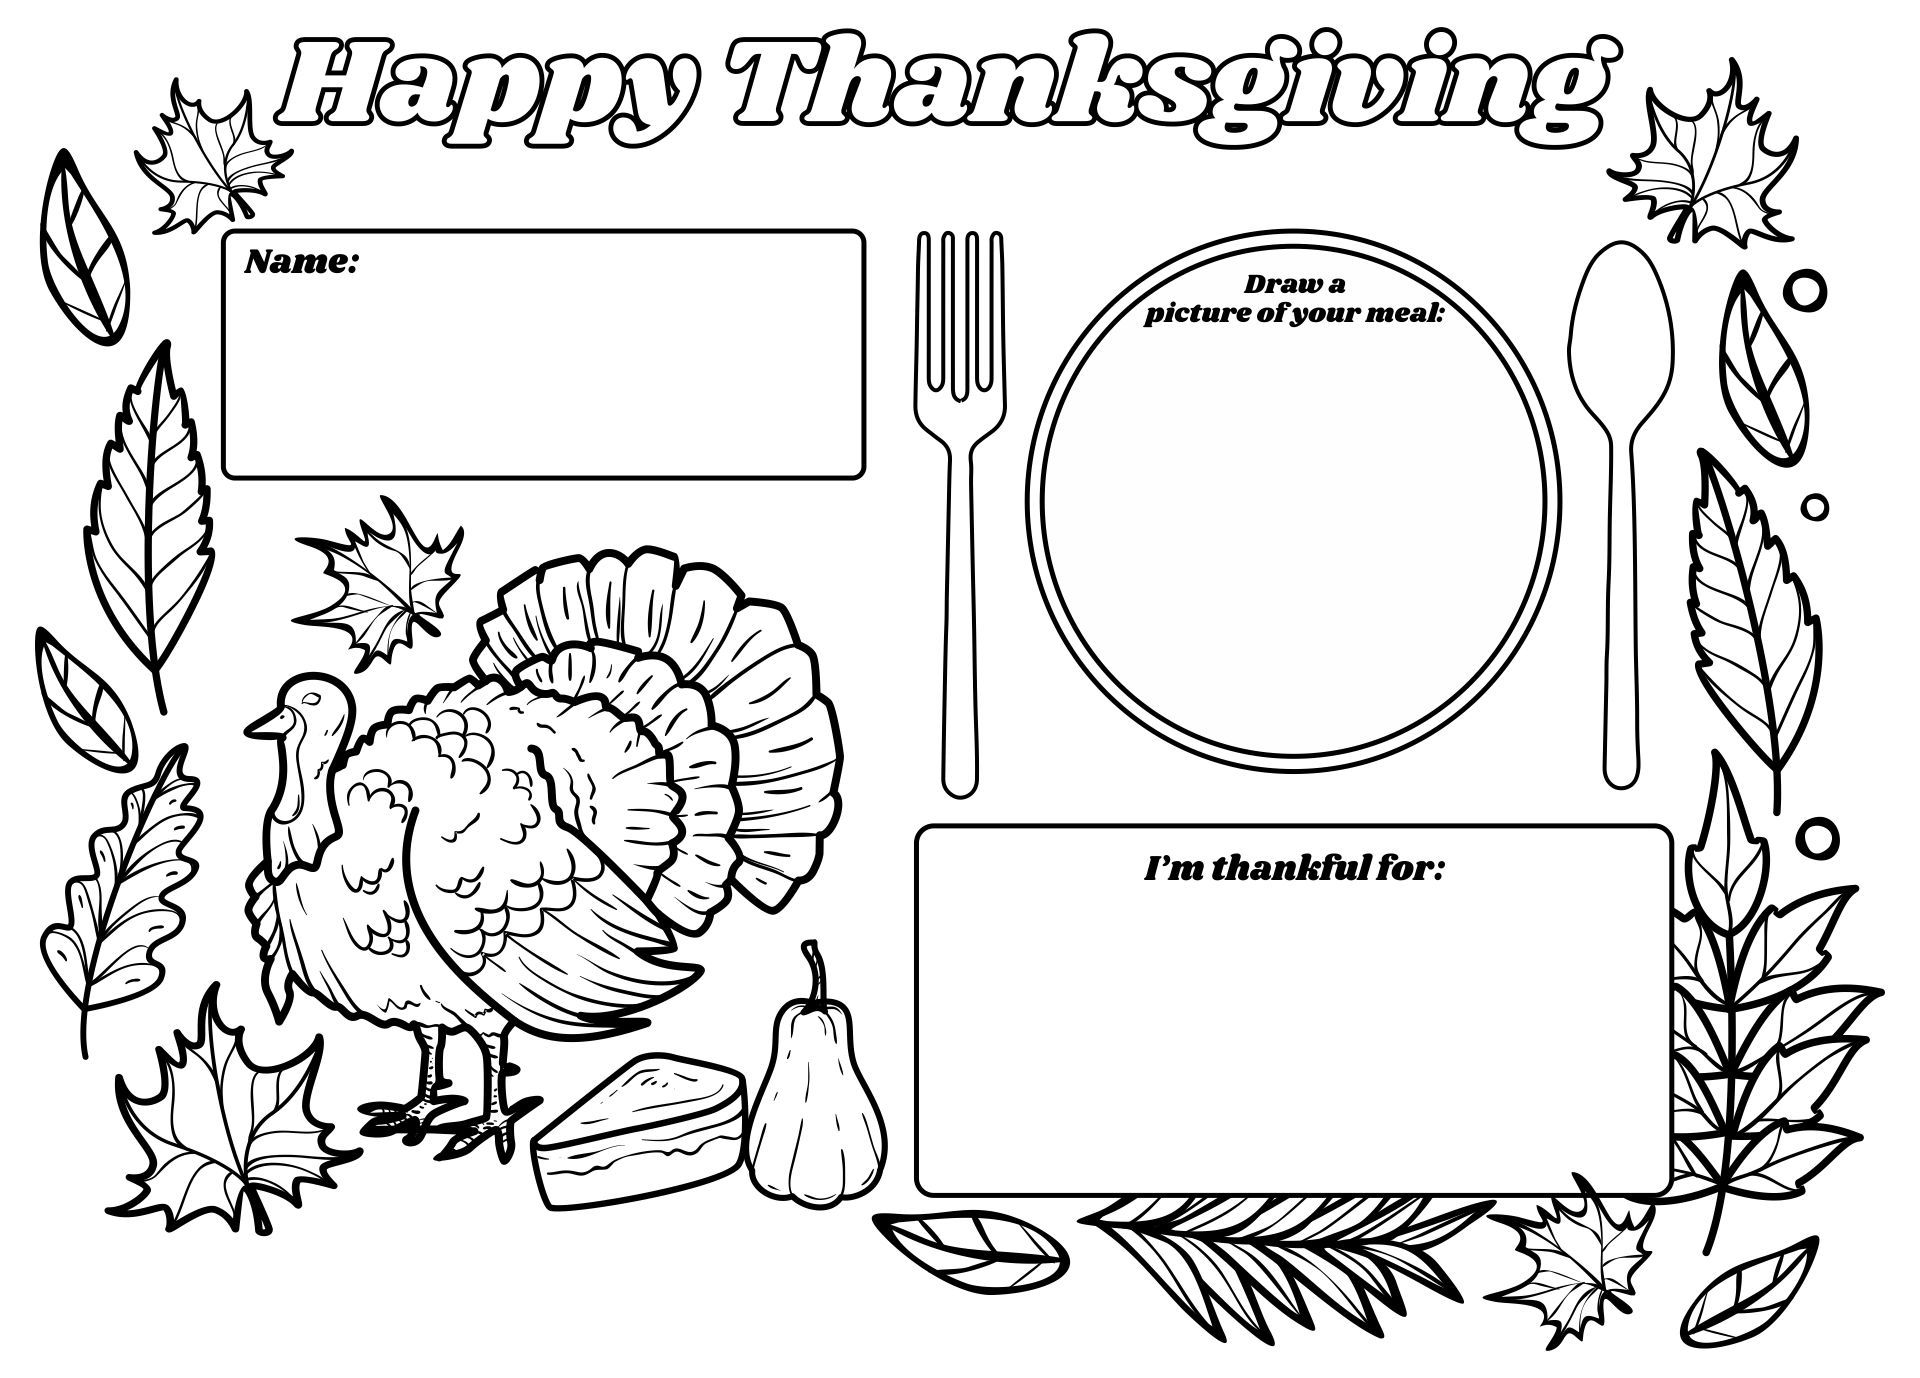 Placemats To Color - 10 Free PDF Printables | Printablee